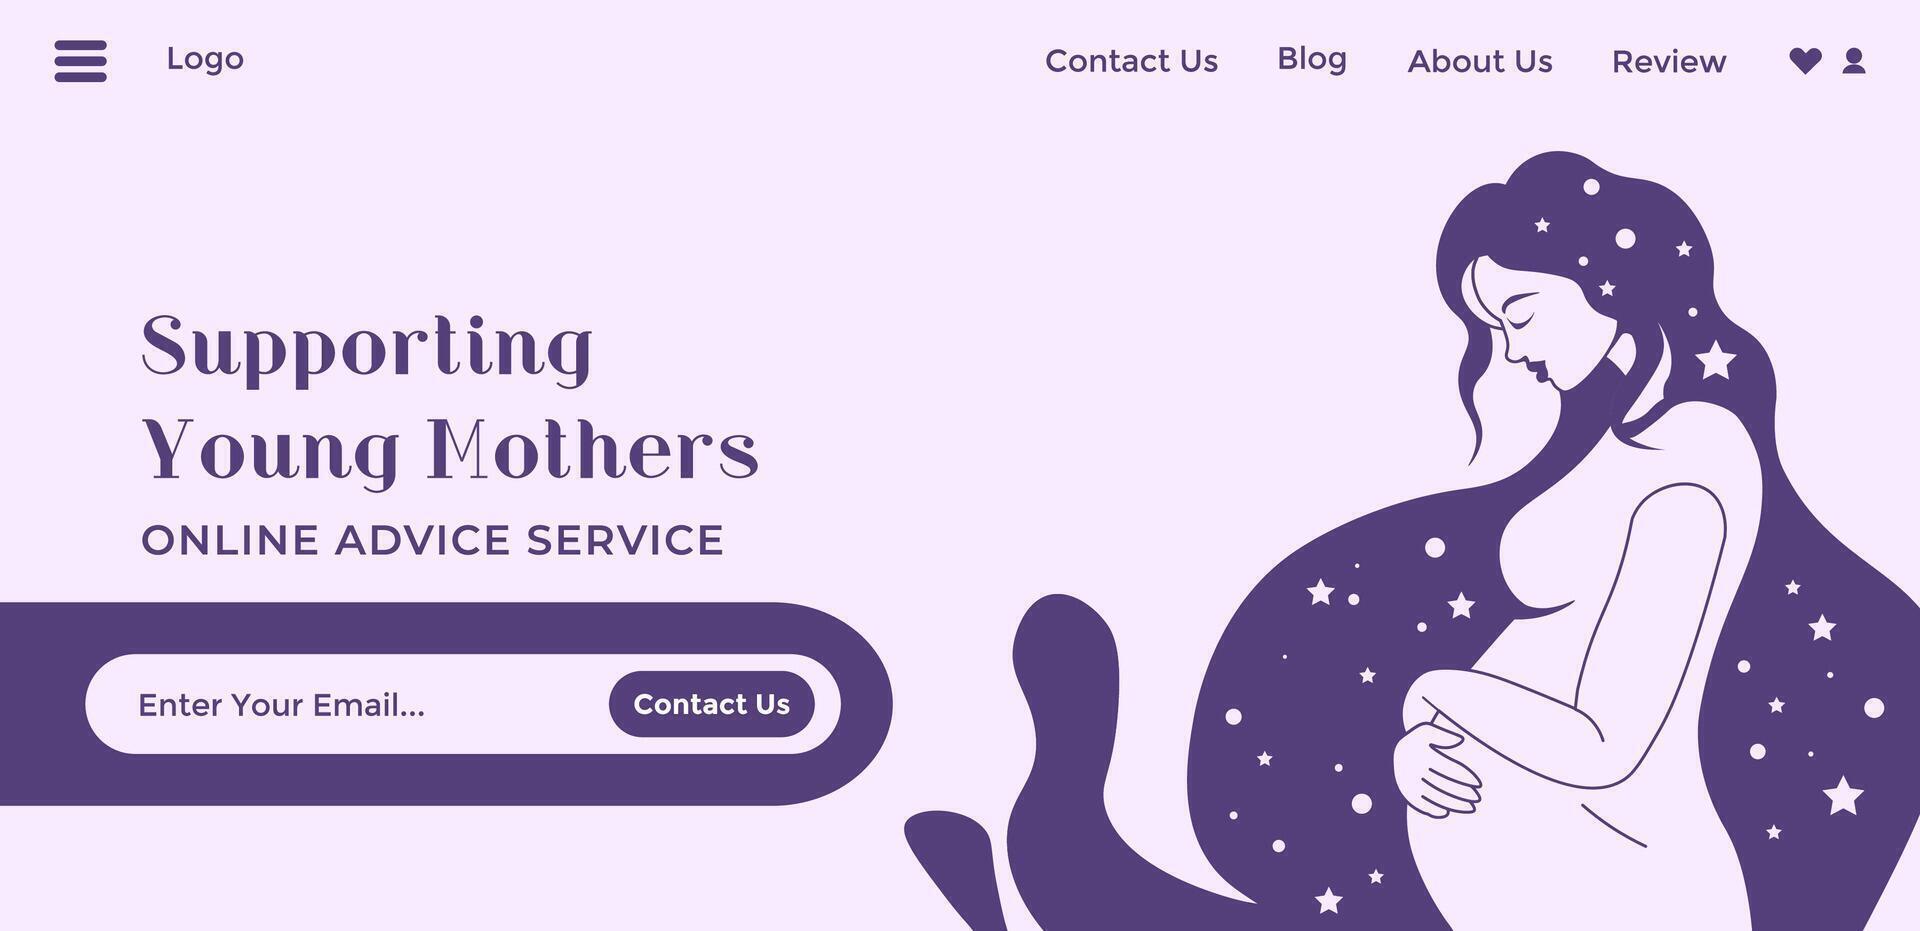 Supporting young mothers online advice service vector